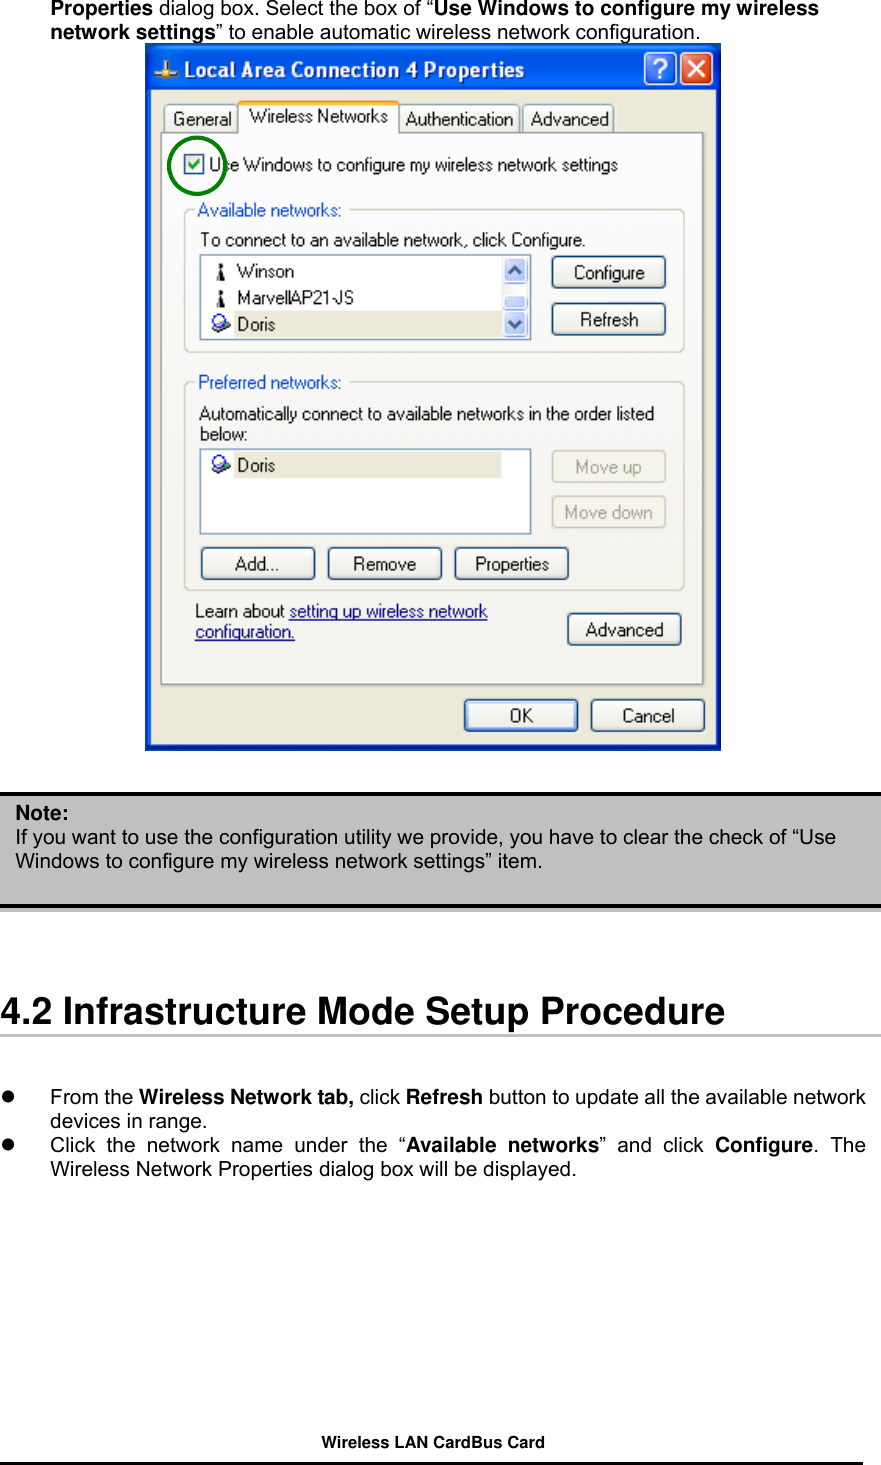 Properties dialog box. Select the box of “Use Windows to configure my wireless network settings” to enable automatic wireless network configuration.            Note: If you want to use the configuration utility we provide, you have to clear the check of “Use Windows to configure my wireless network settings” item.   4.2 Infrastructure Mode Setup Procedure     From the Wireless Network tab, click Refresh button to update all the available network devices in range.     Click the network name under the “Available networks” and click Configure. The Wireless Network Properties dialog box will be displayed.  Wireless LAN CardBus Card 